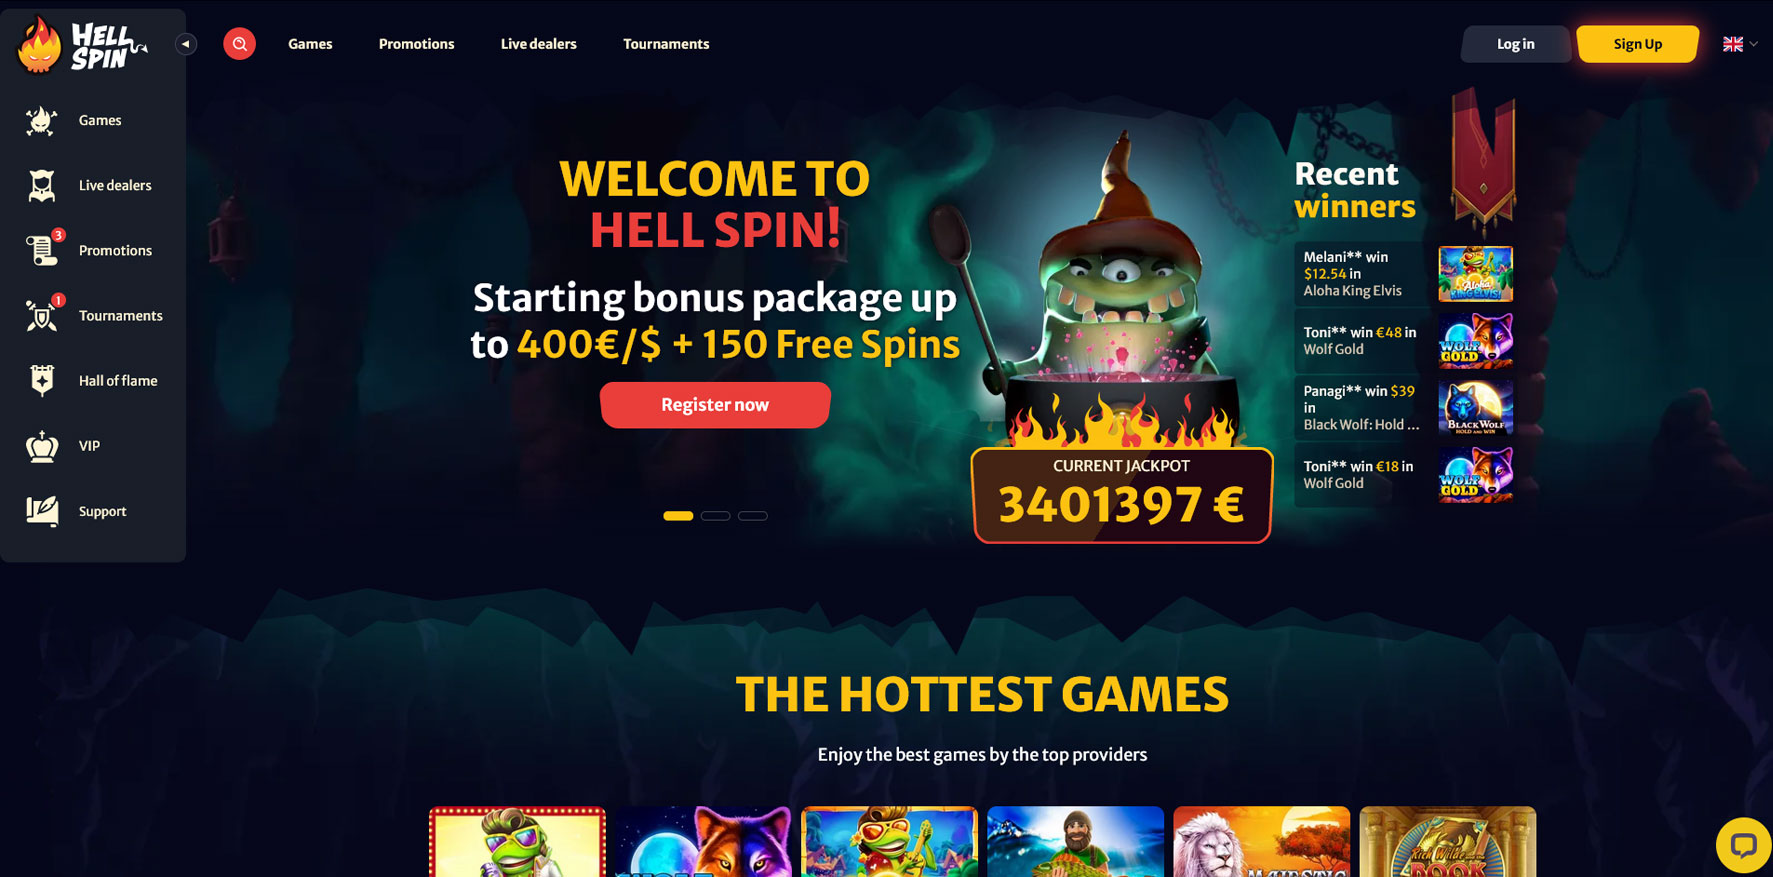 How To Get Fabulous online casinos On A Tight Budget